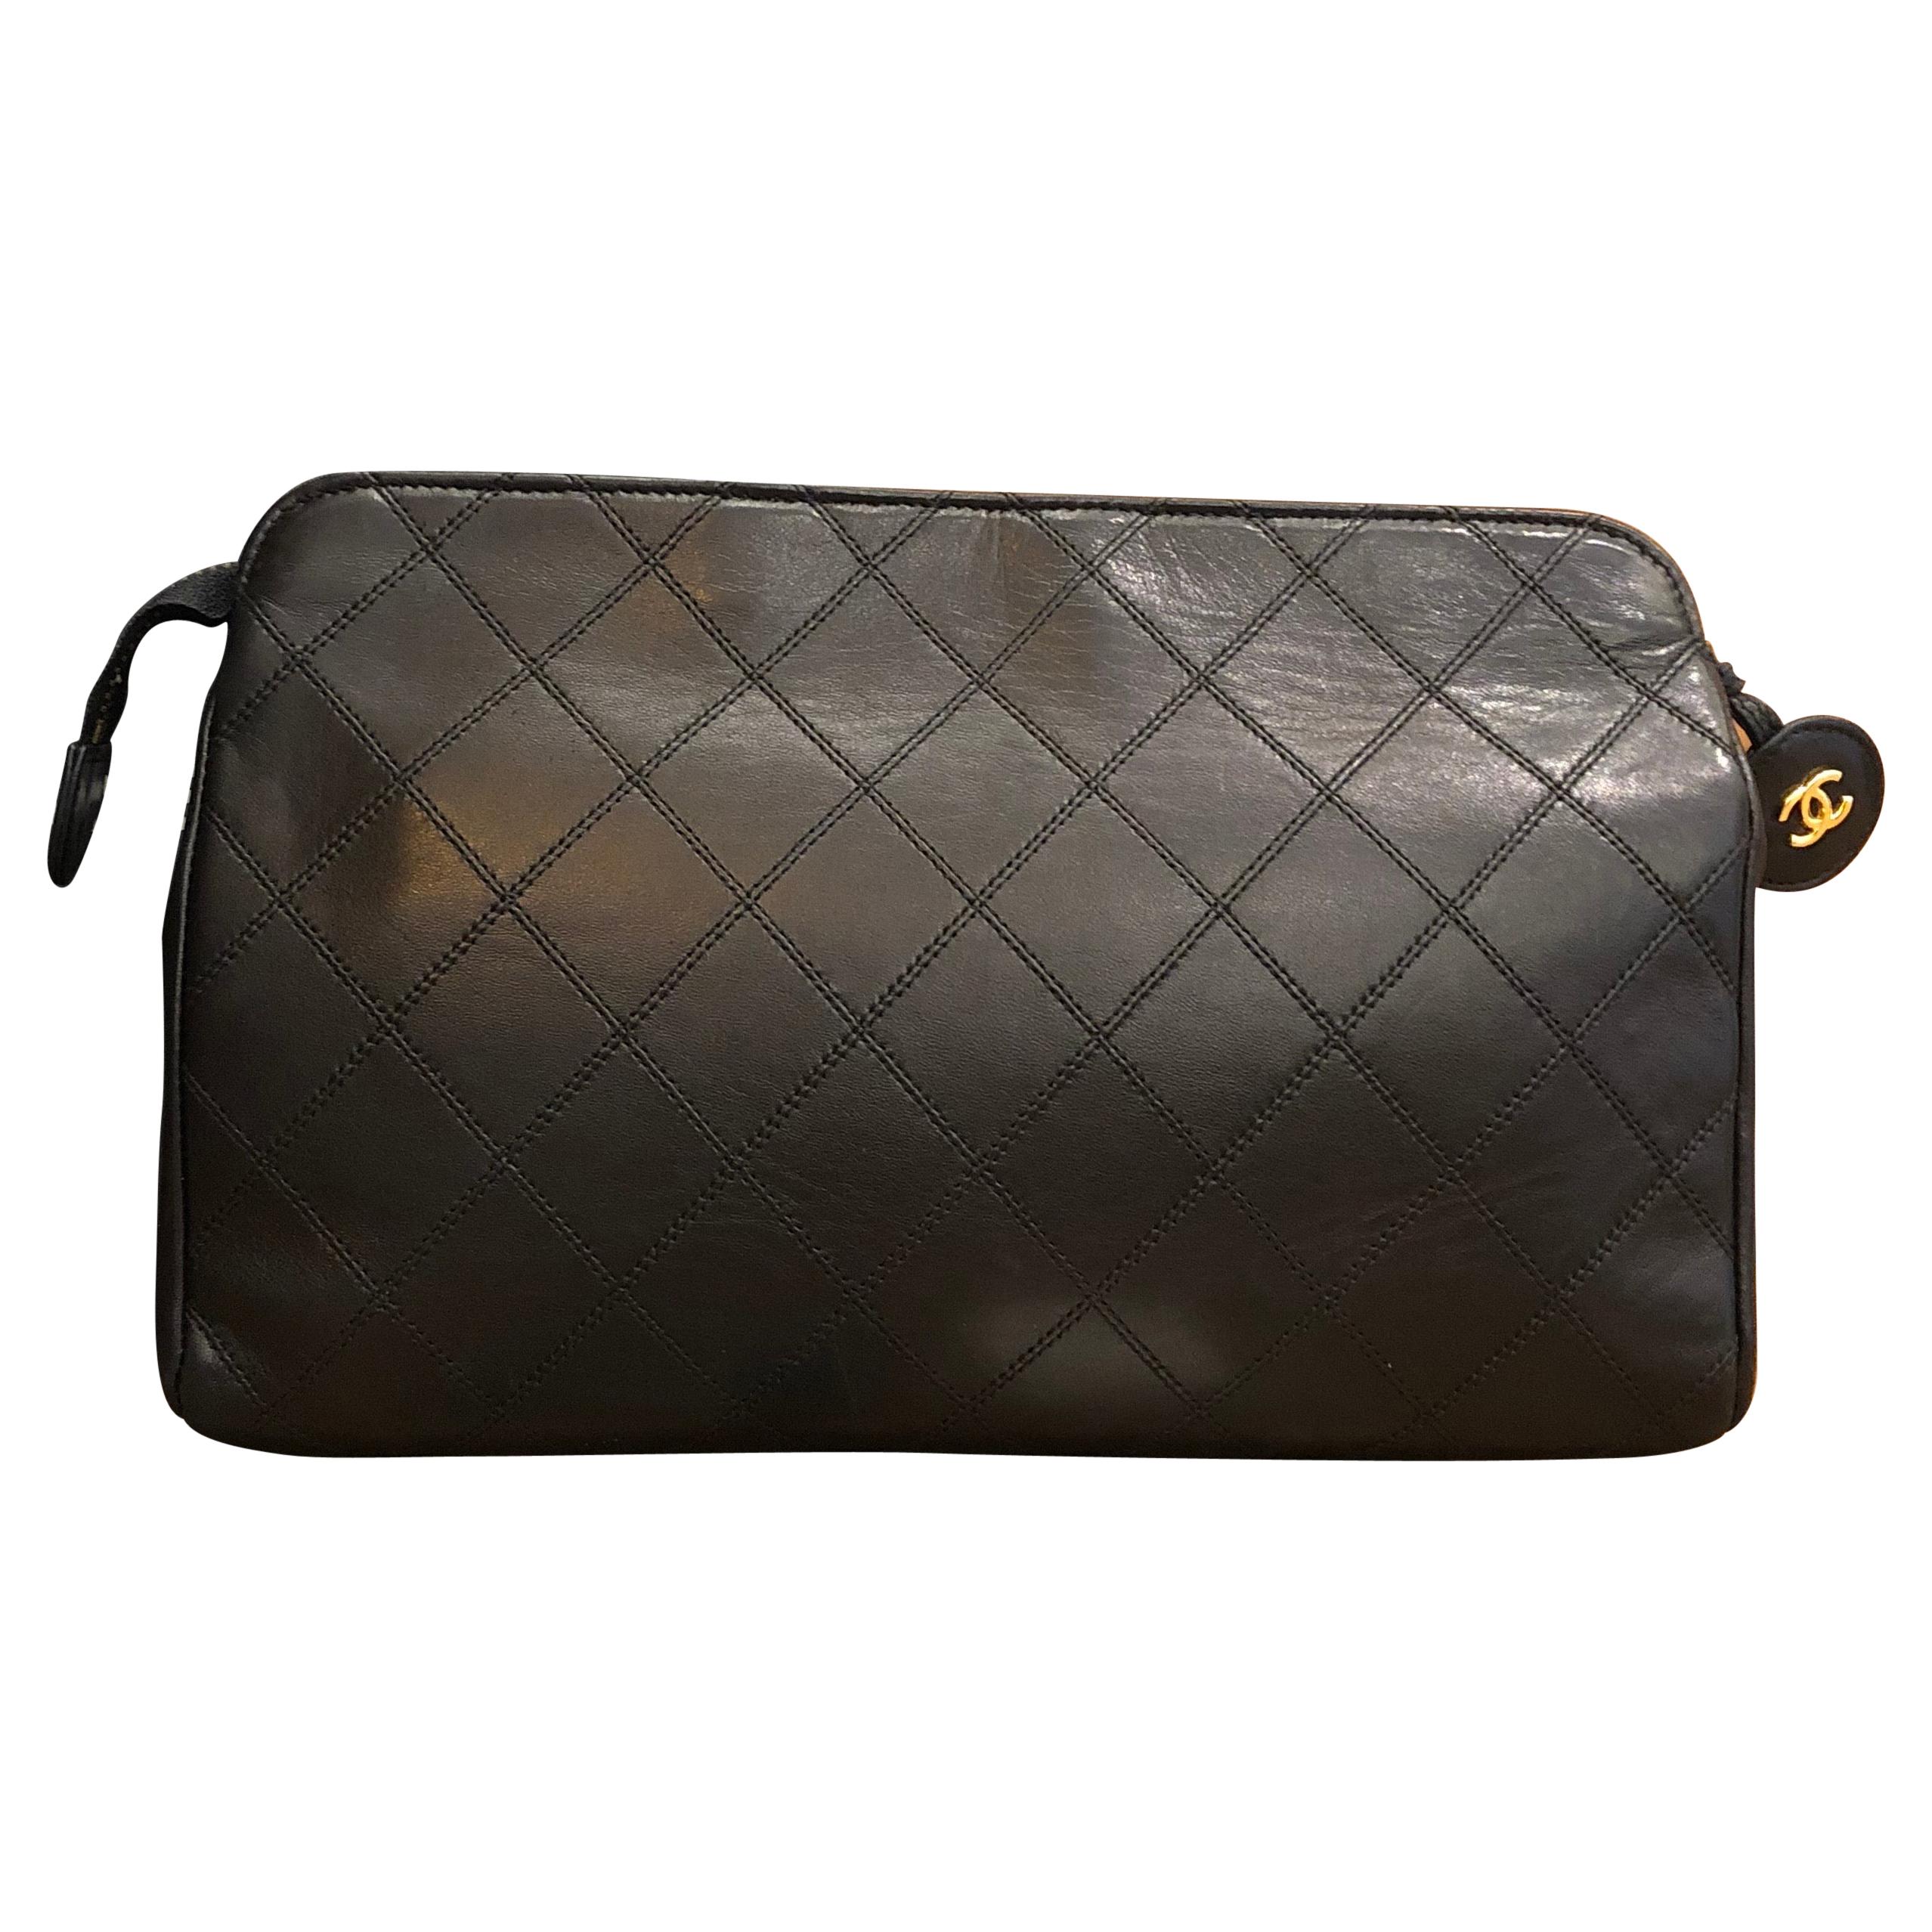 CHANEL Black Quilted Lambskin Leather Clutch Bag